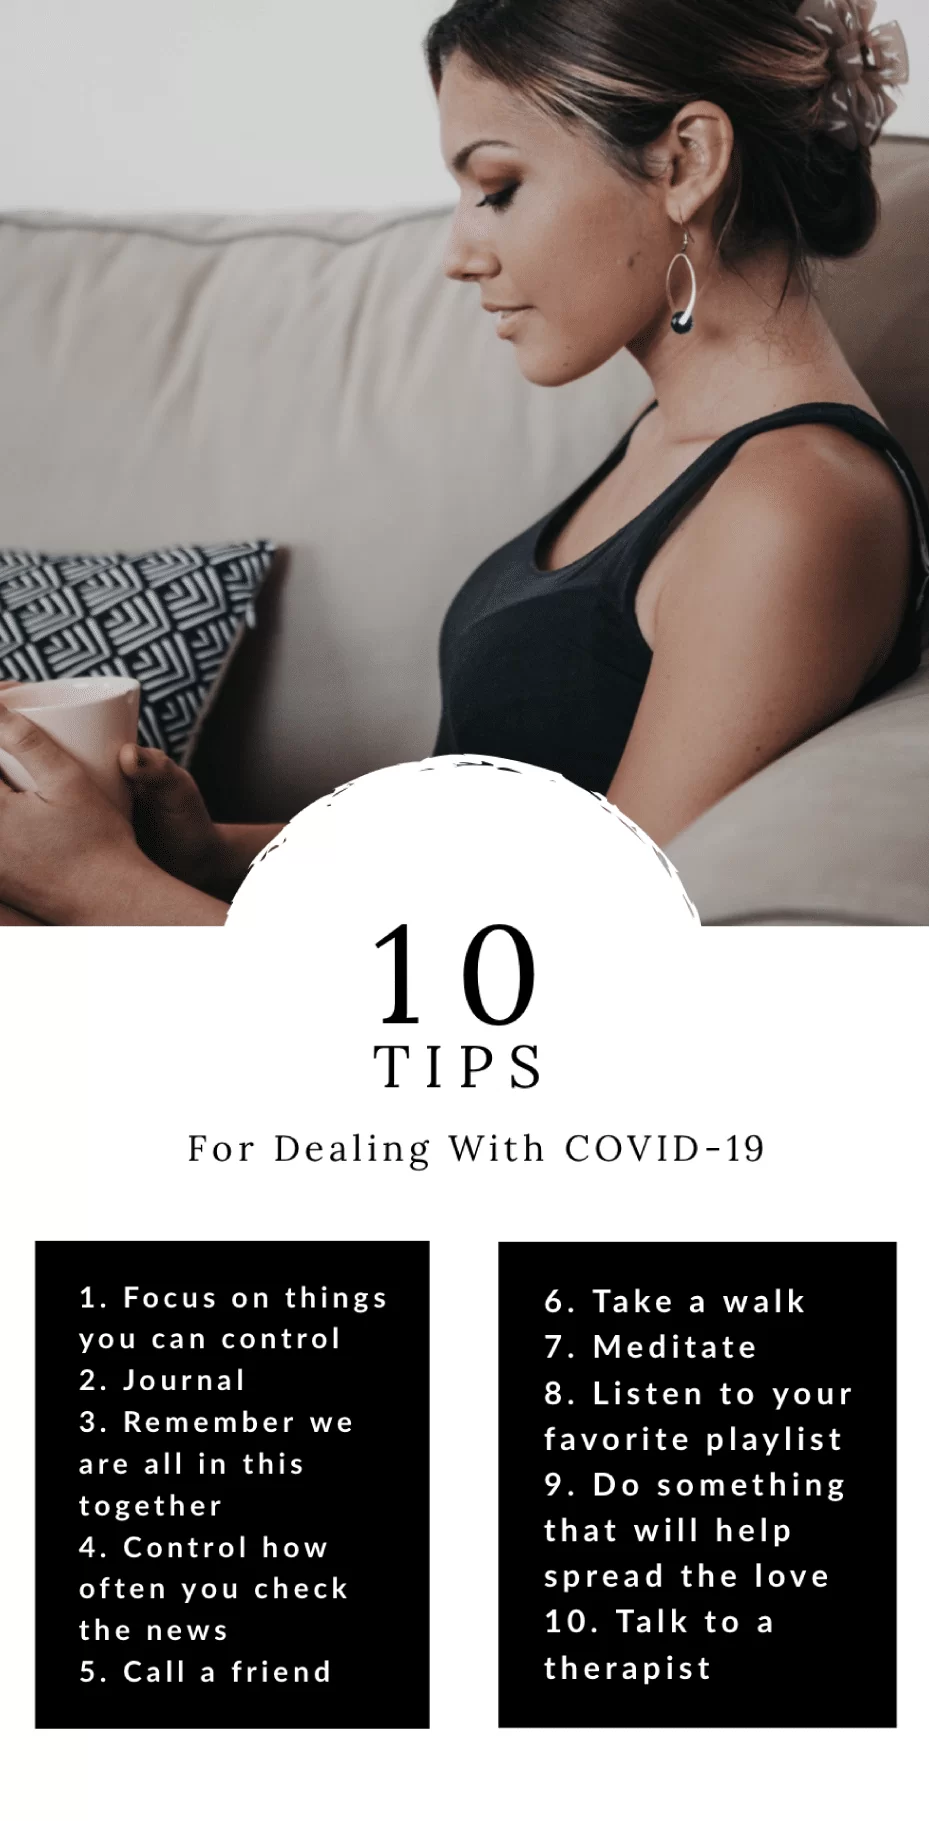 Dealing with Covid-19